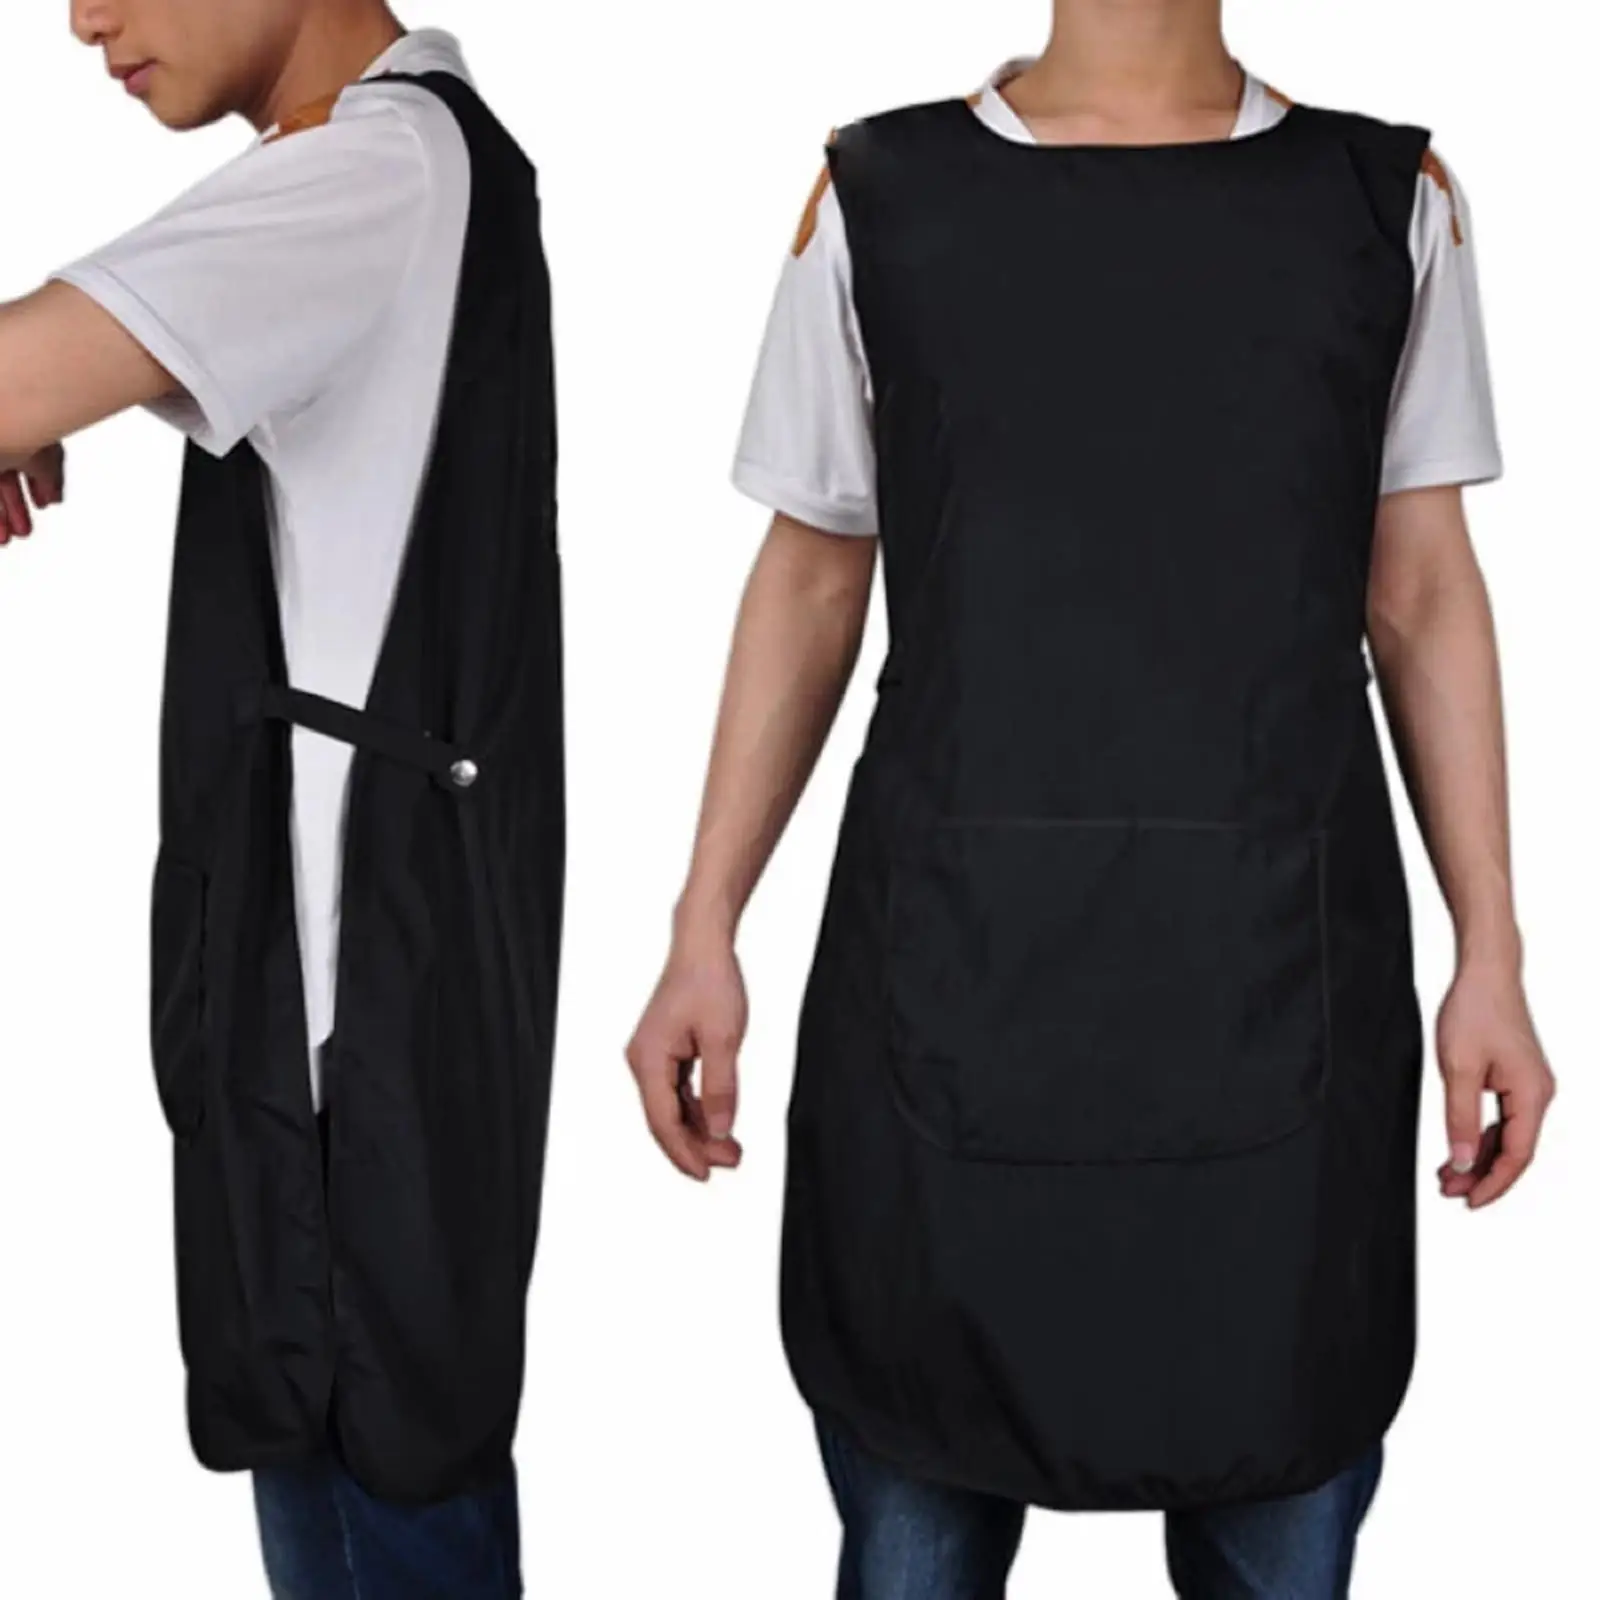 Barber Haircut Styling Apron Waterproof Durable Material Accessory with Large pocket Comfortable Machine Washable ,Black